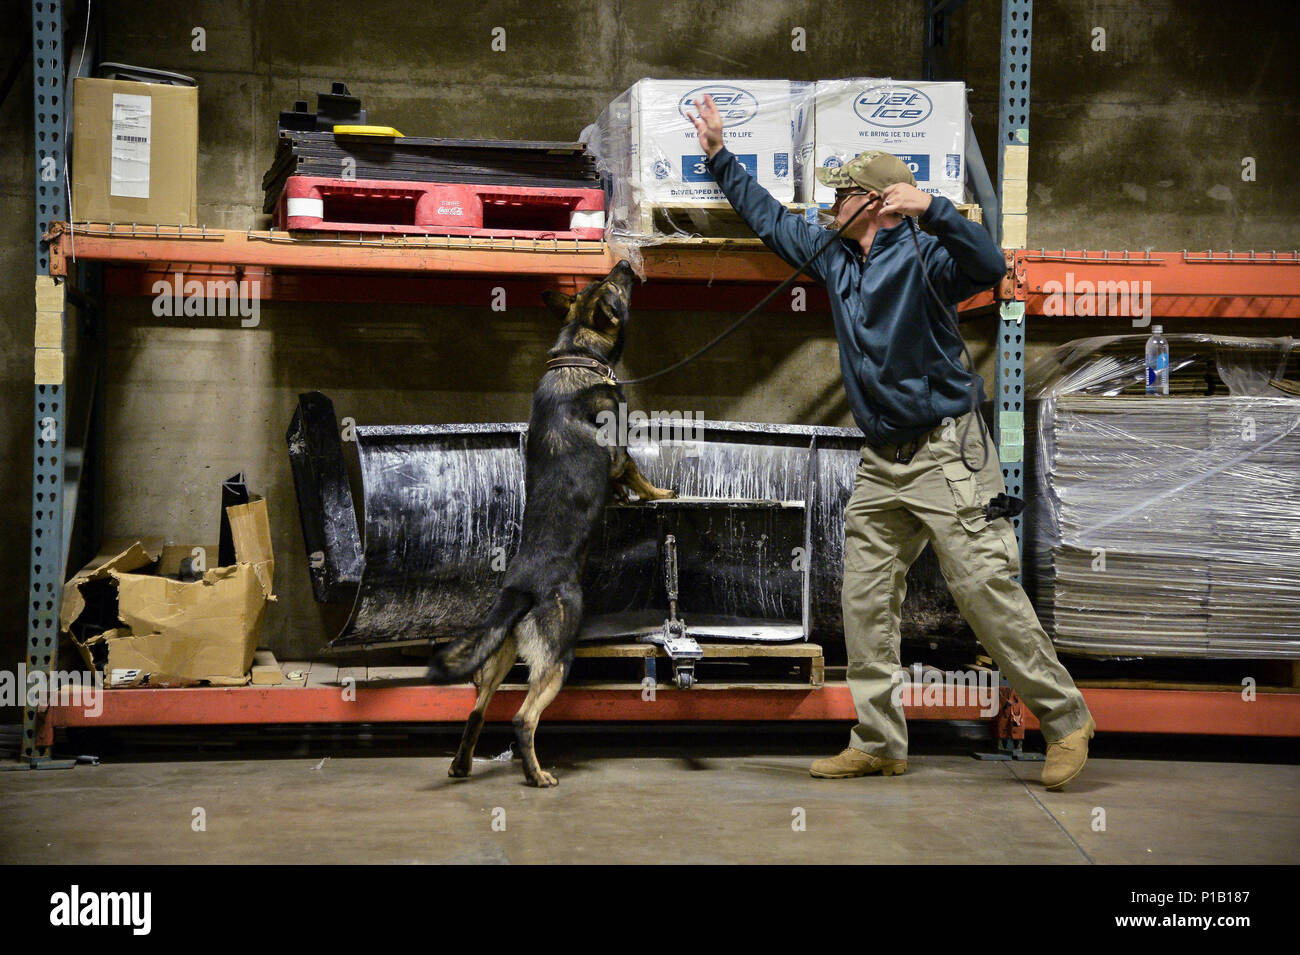 Staff Sgt. Dustin Braddy, 75th Security Forces Squadron, and his military working dog, Jimo, search for homemade explosives Oct. 6 at Vivint Smart Home Arena, Salt Lake City. Bureau of Alcohol, Tobacco, Firearms and Explosives National Canine Division has successfully imprinted over 3,000 Defense Department military working dogs on HME. (U.S. Air Force photo by R. Nial Bradshaw) Stock Photo